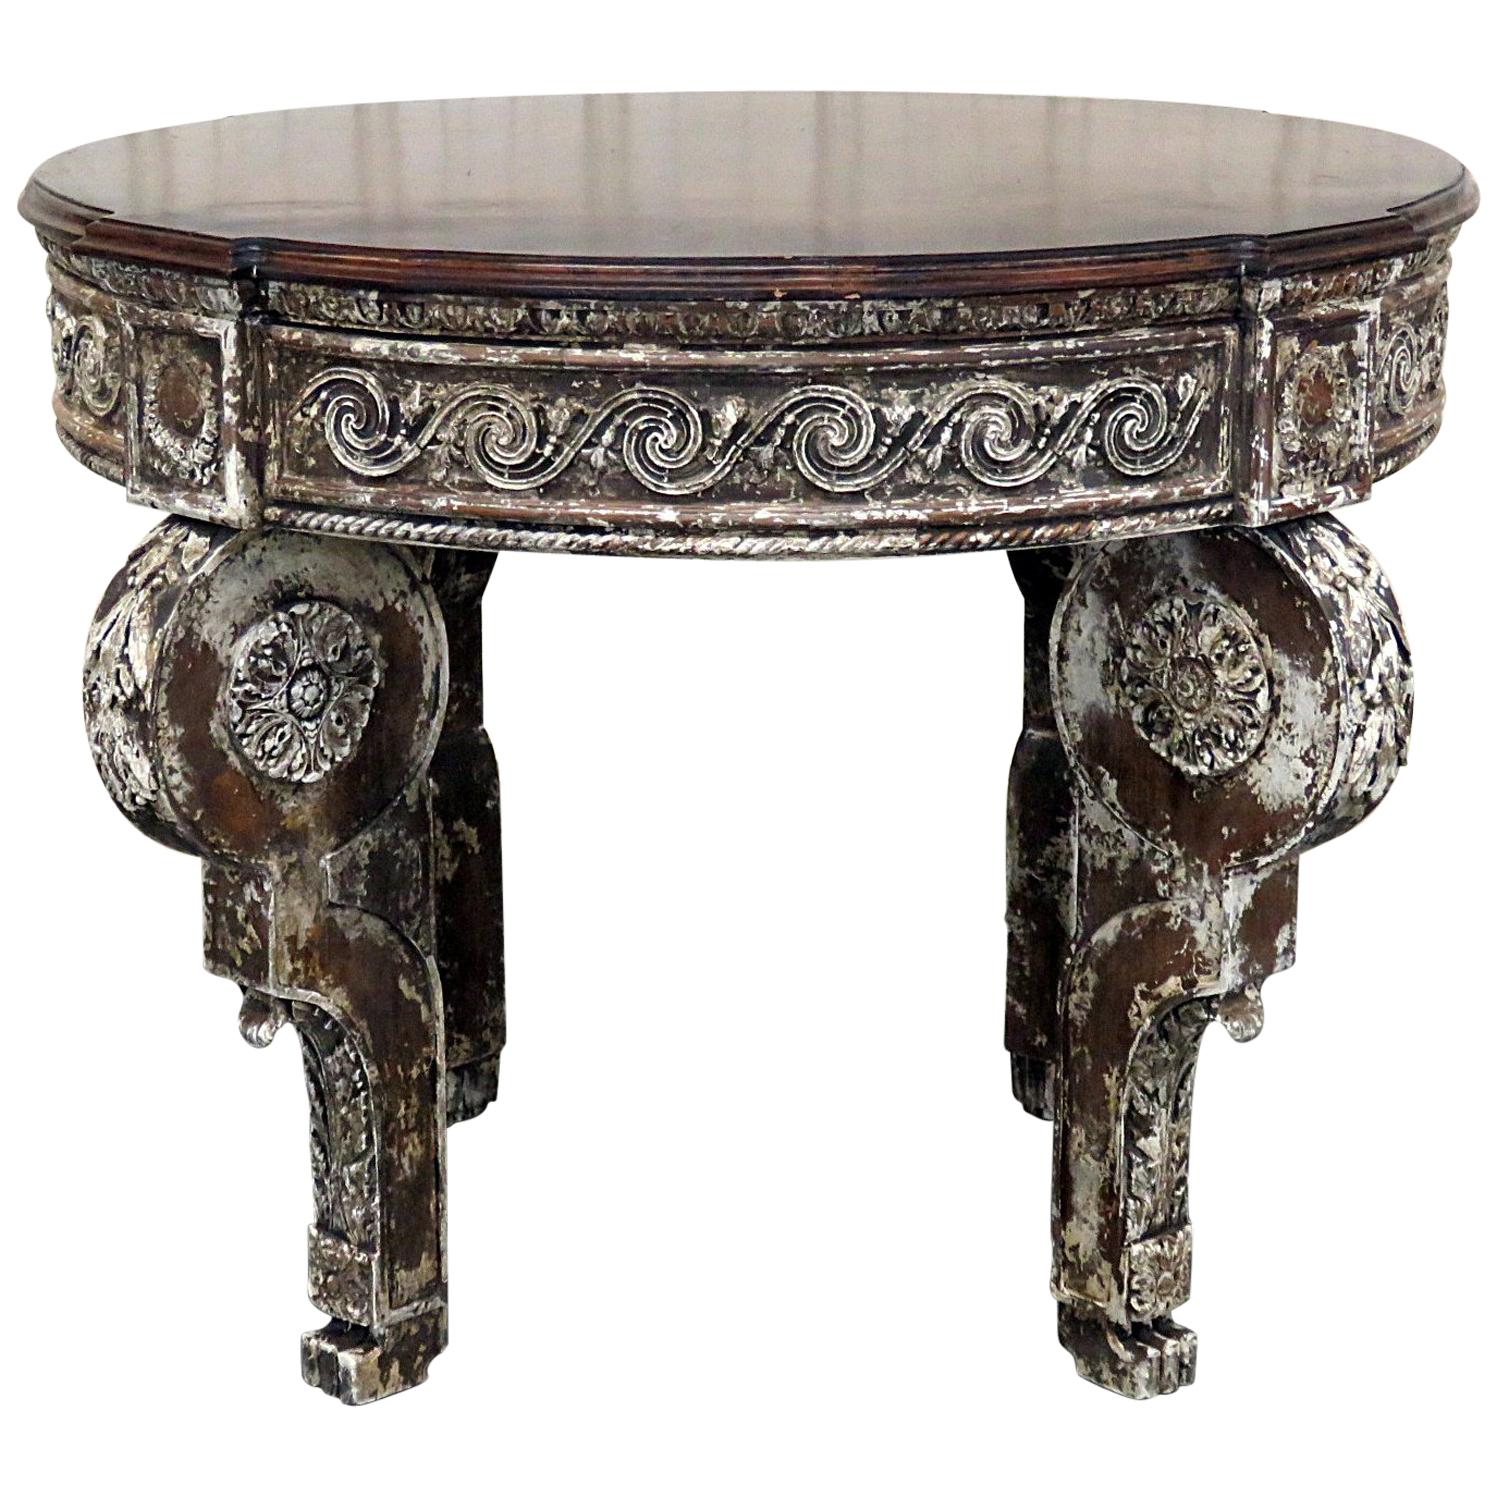 Distress Paint Decorated Swedish Napoleonic Style Center Table